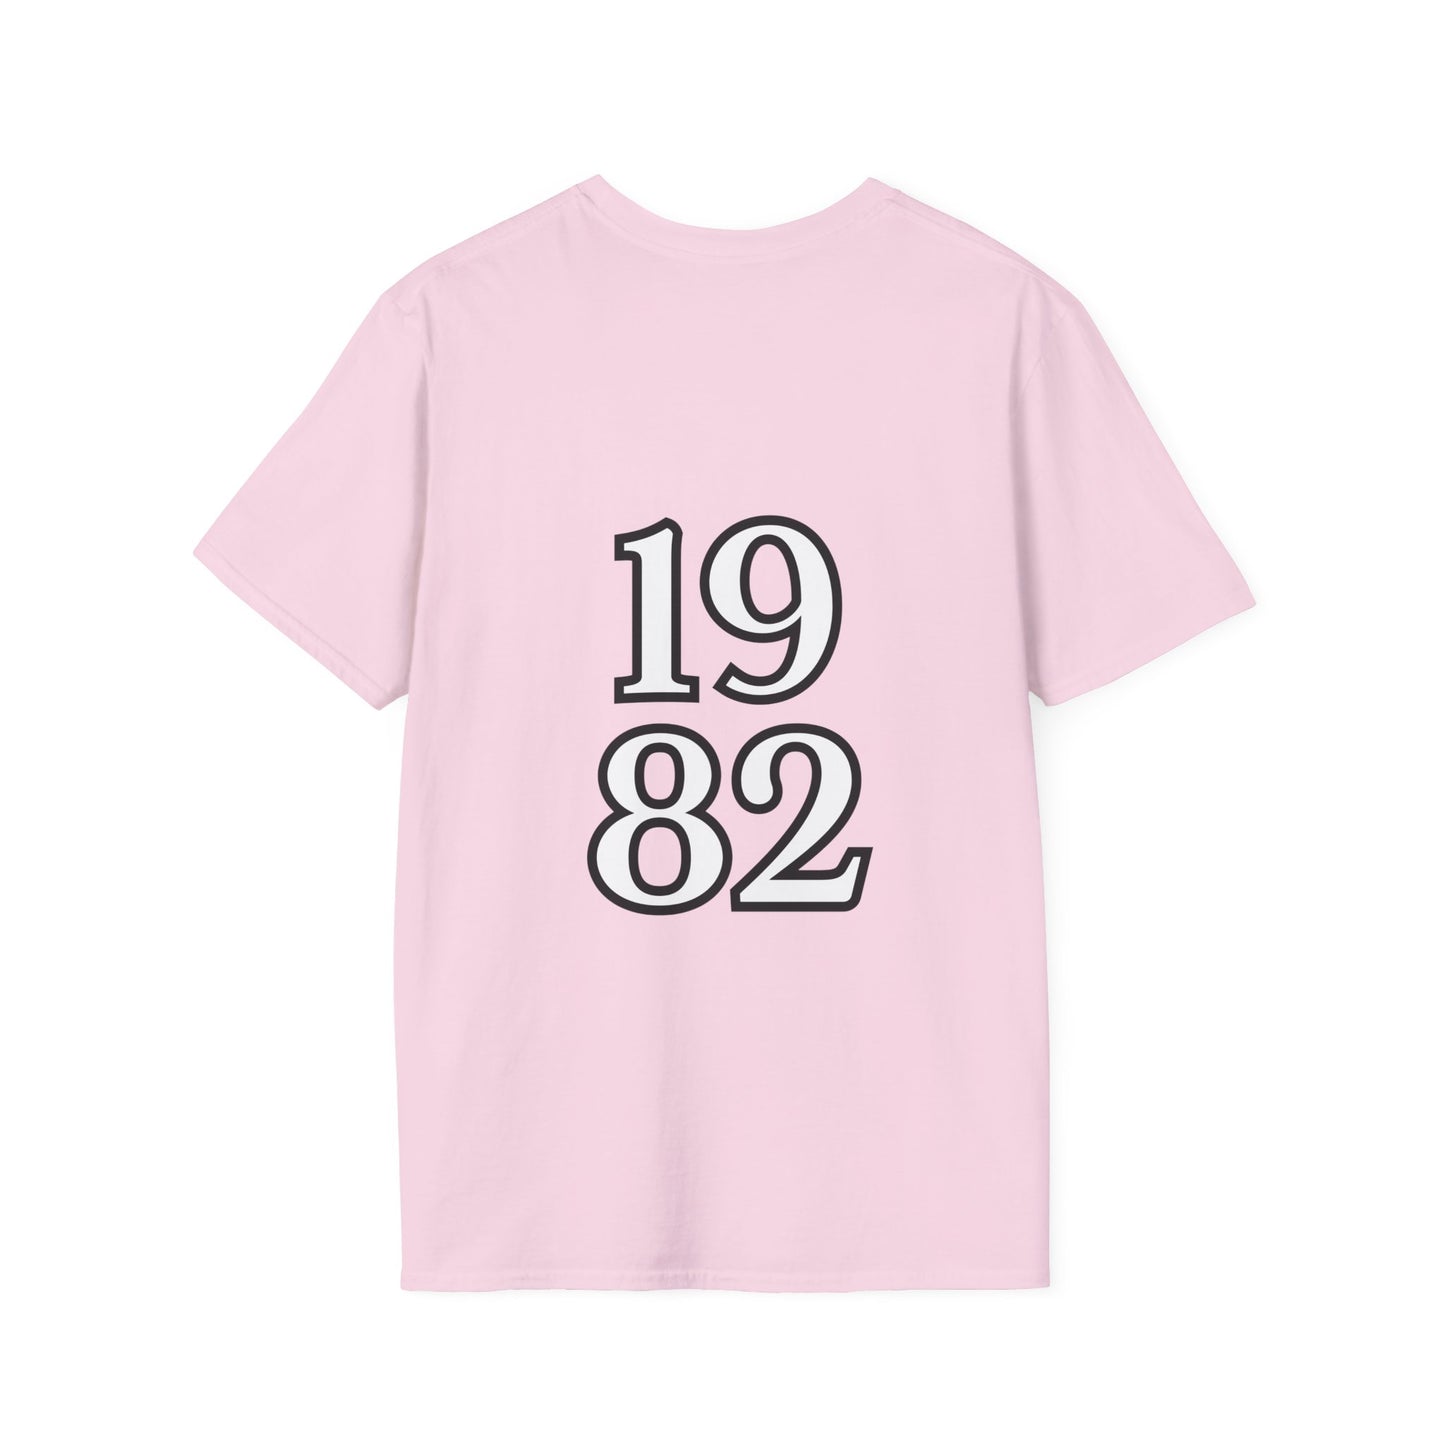 Copy of 1982 x Years Collection - tee